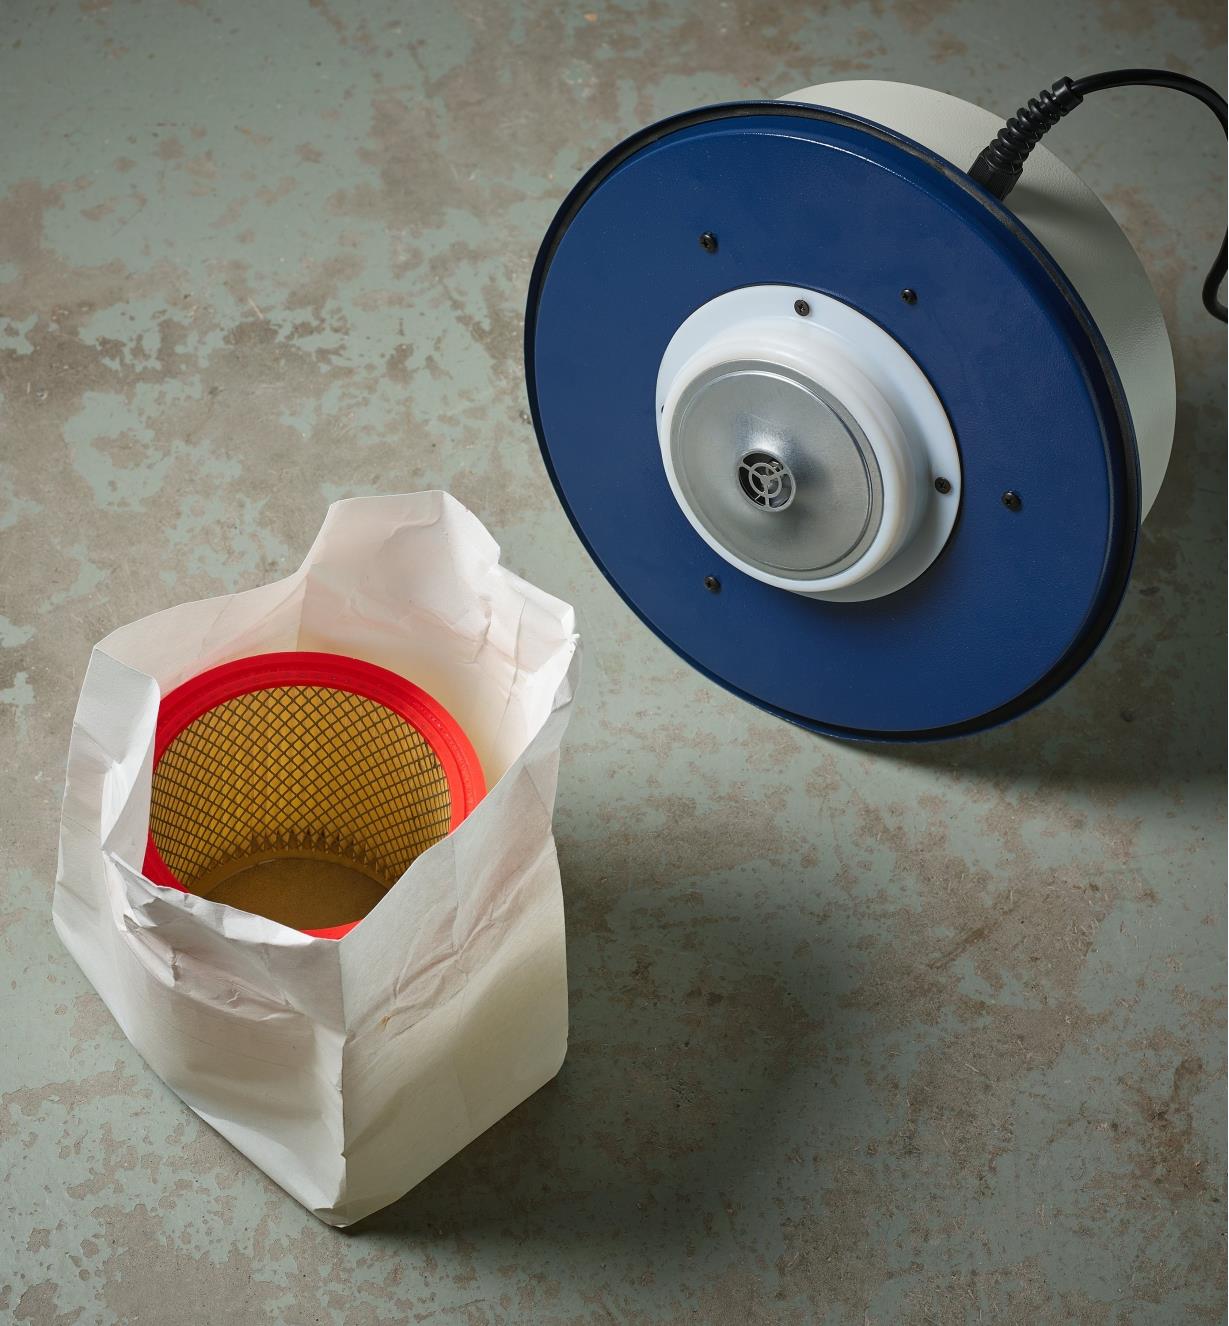 The pre-filter bag and cartridge filter removed from a Rikon 12 gallon dust extractor